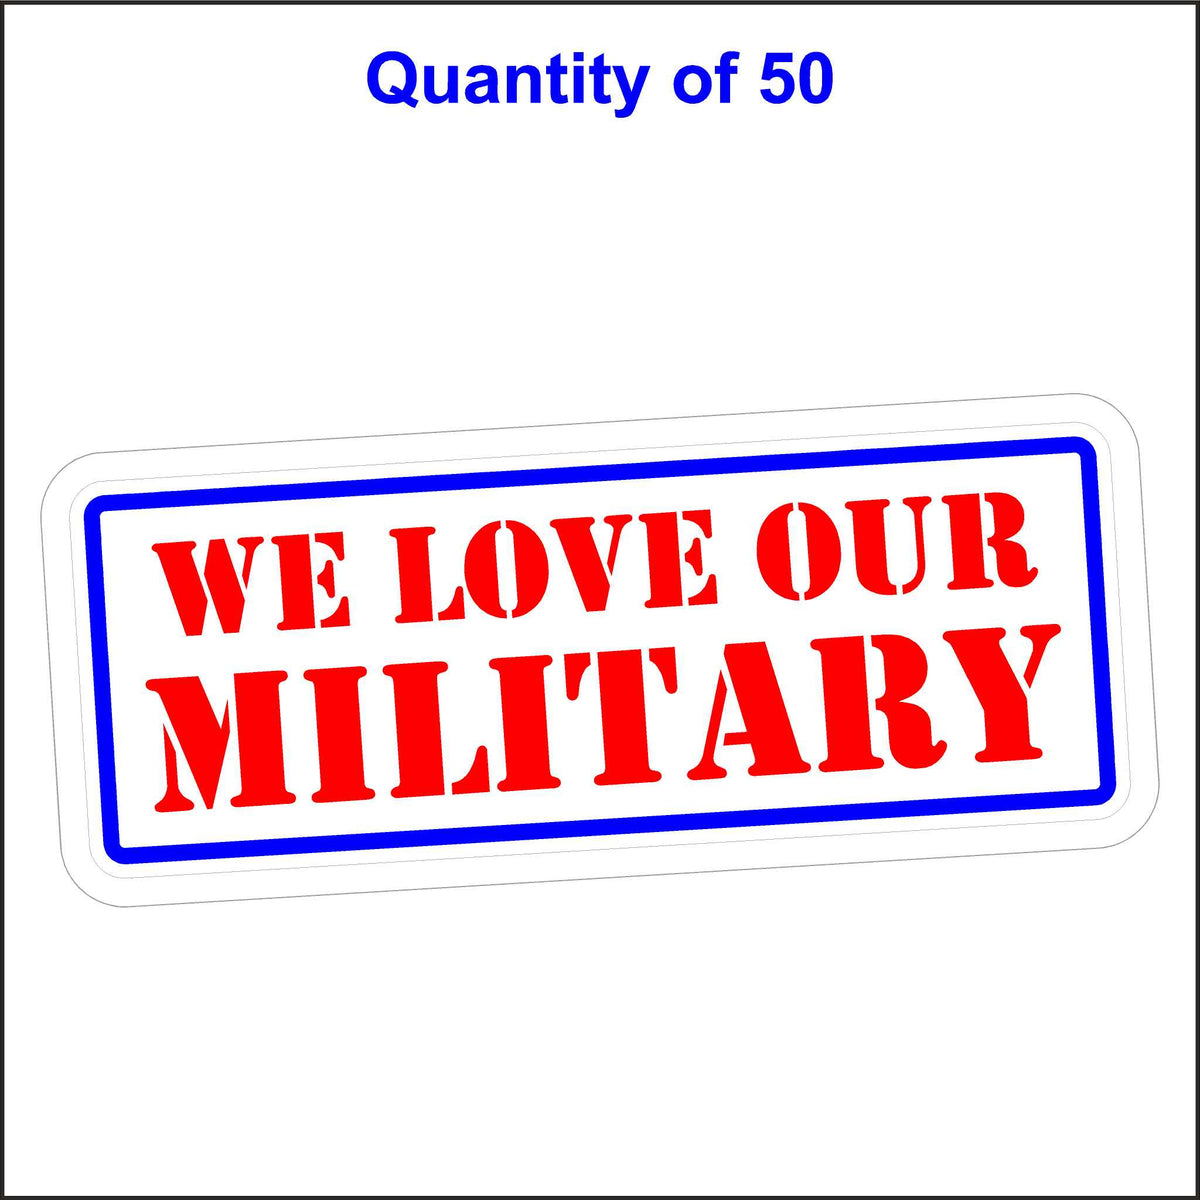 We Love Our Military Sticker. 50 Quantity.